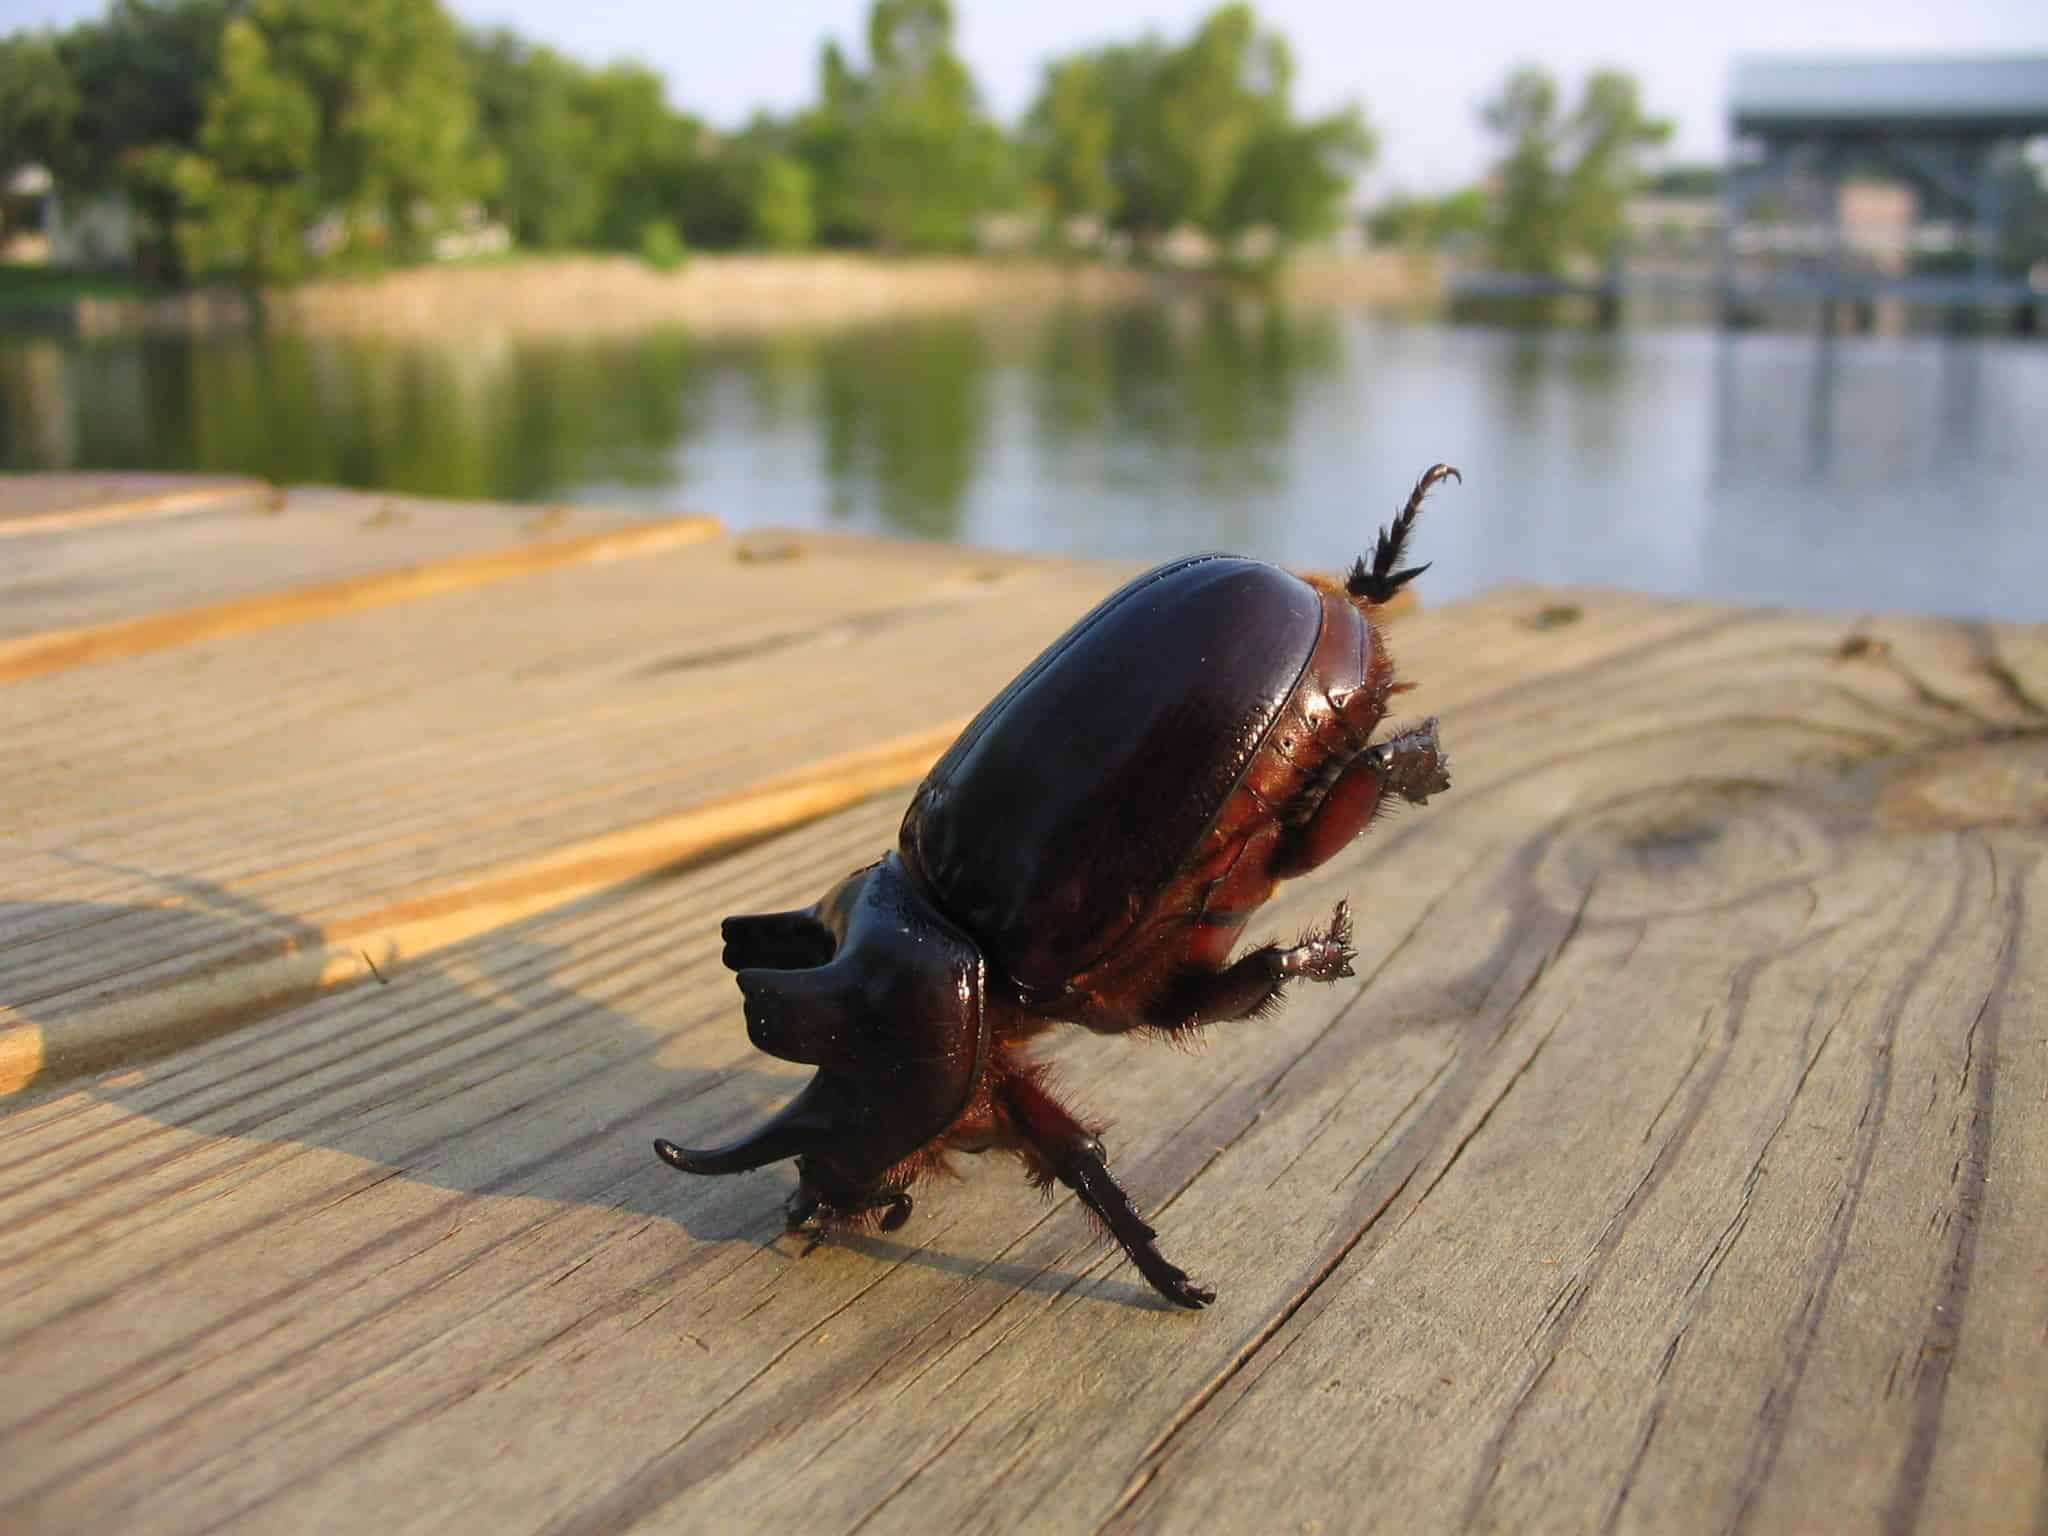 Beetle jumping for joy